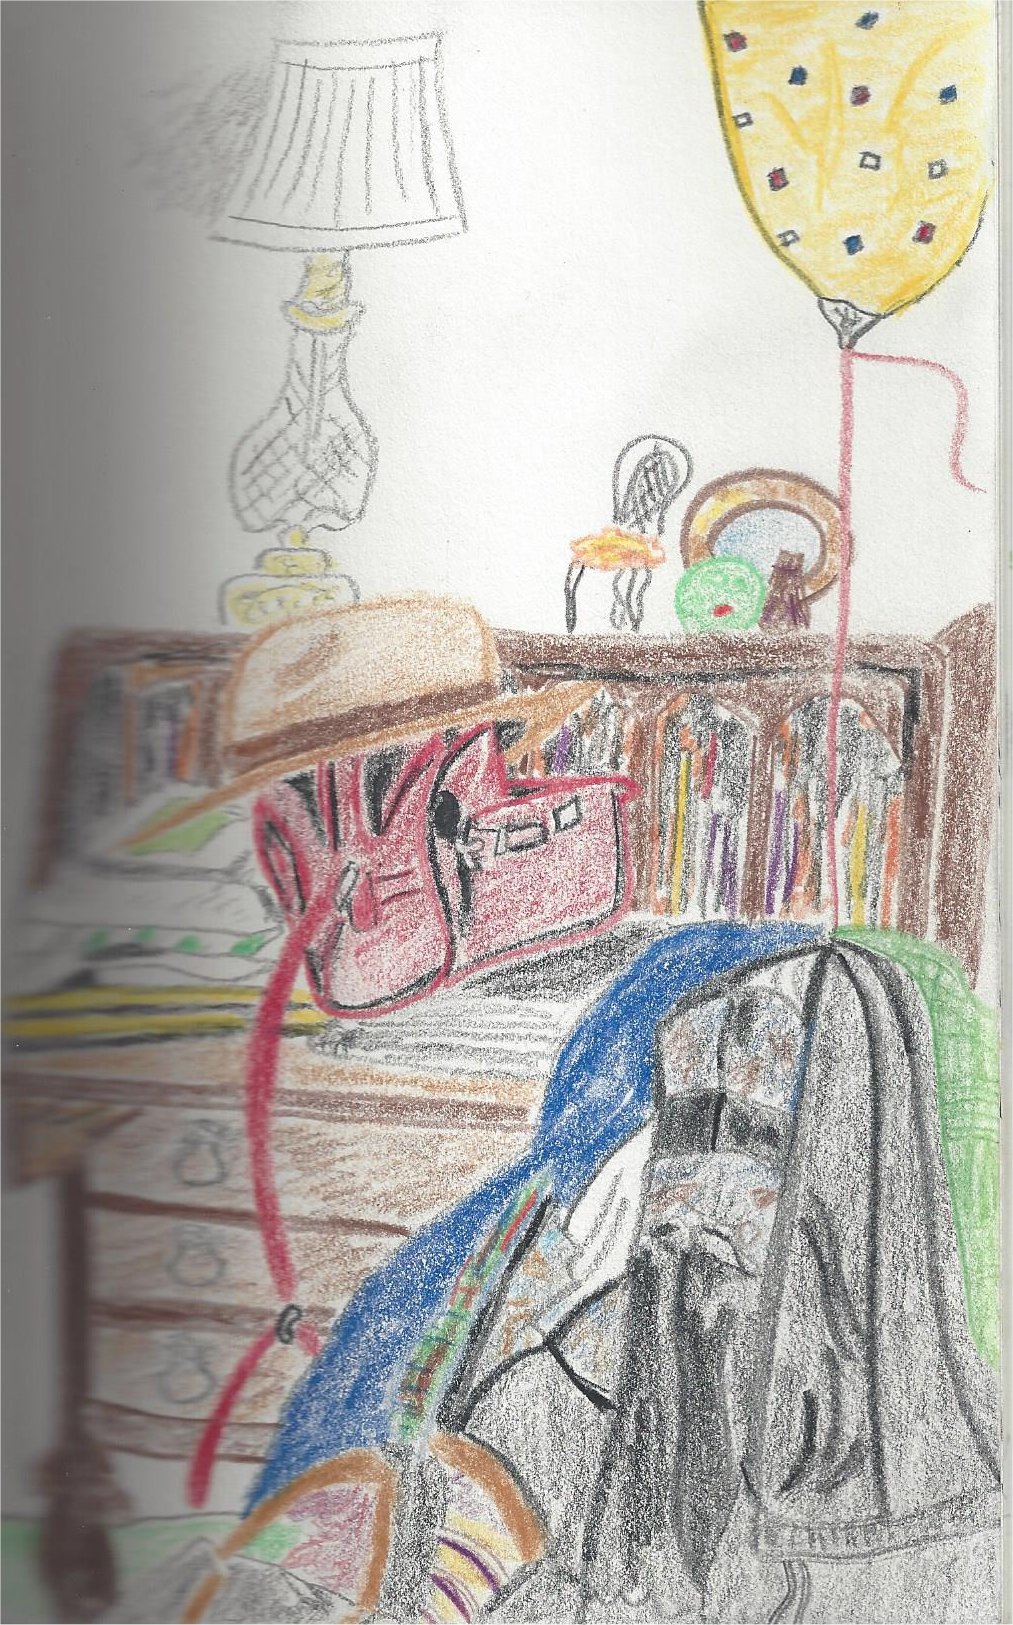 straw hat on a cluttered desk